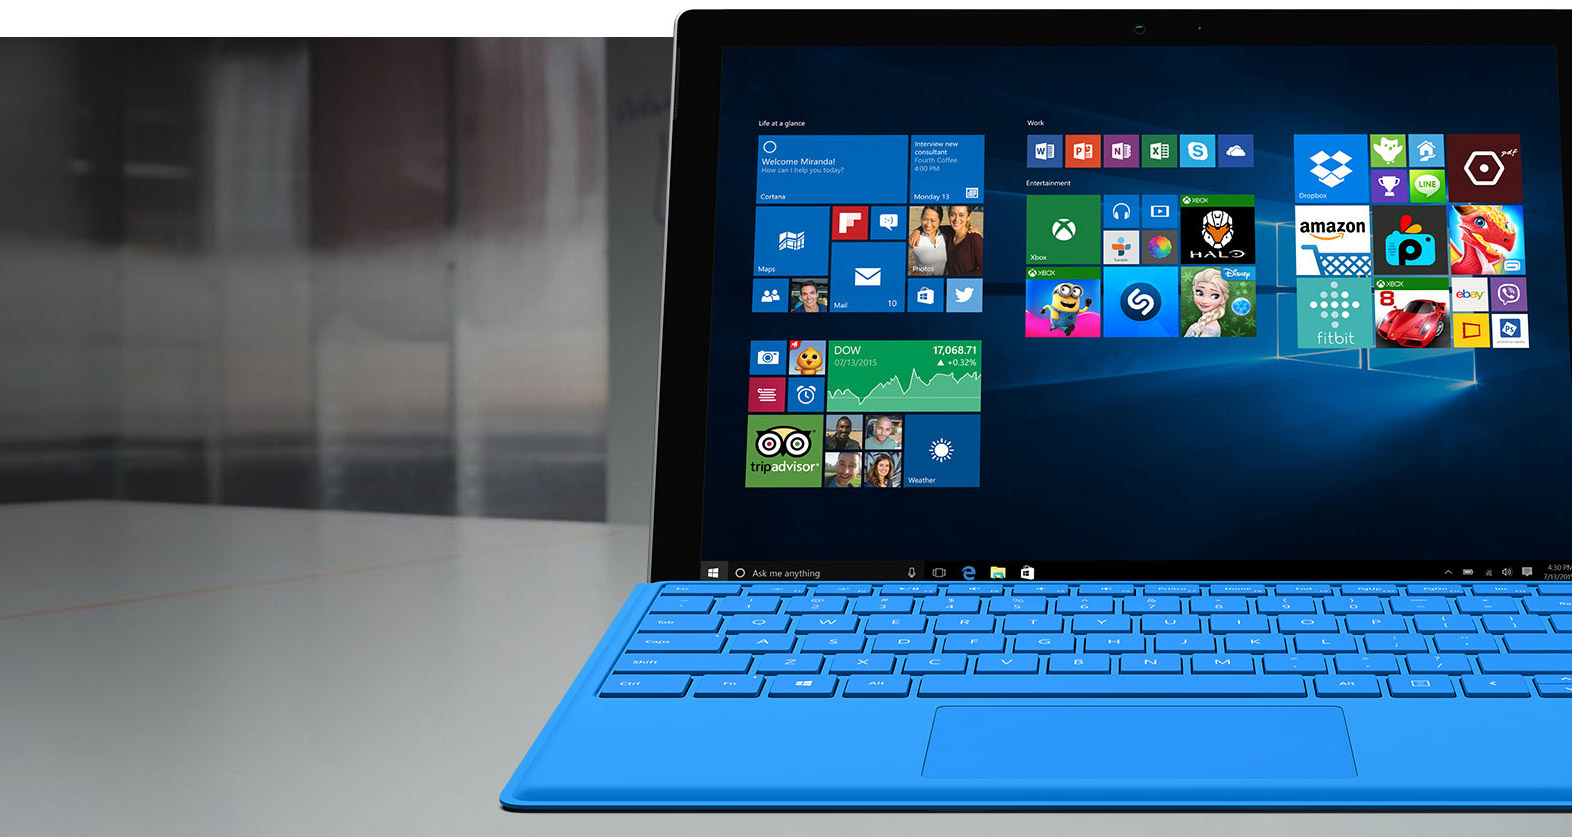 Microsoft Surface Pro 4 launched in India starting at Rs. 89,990 